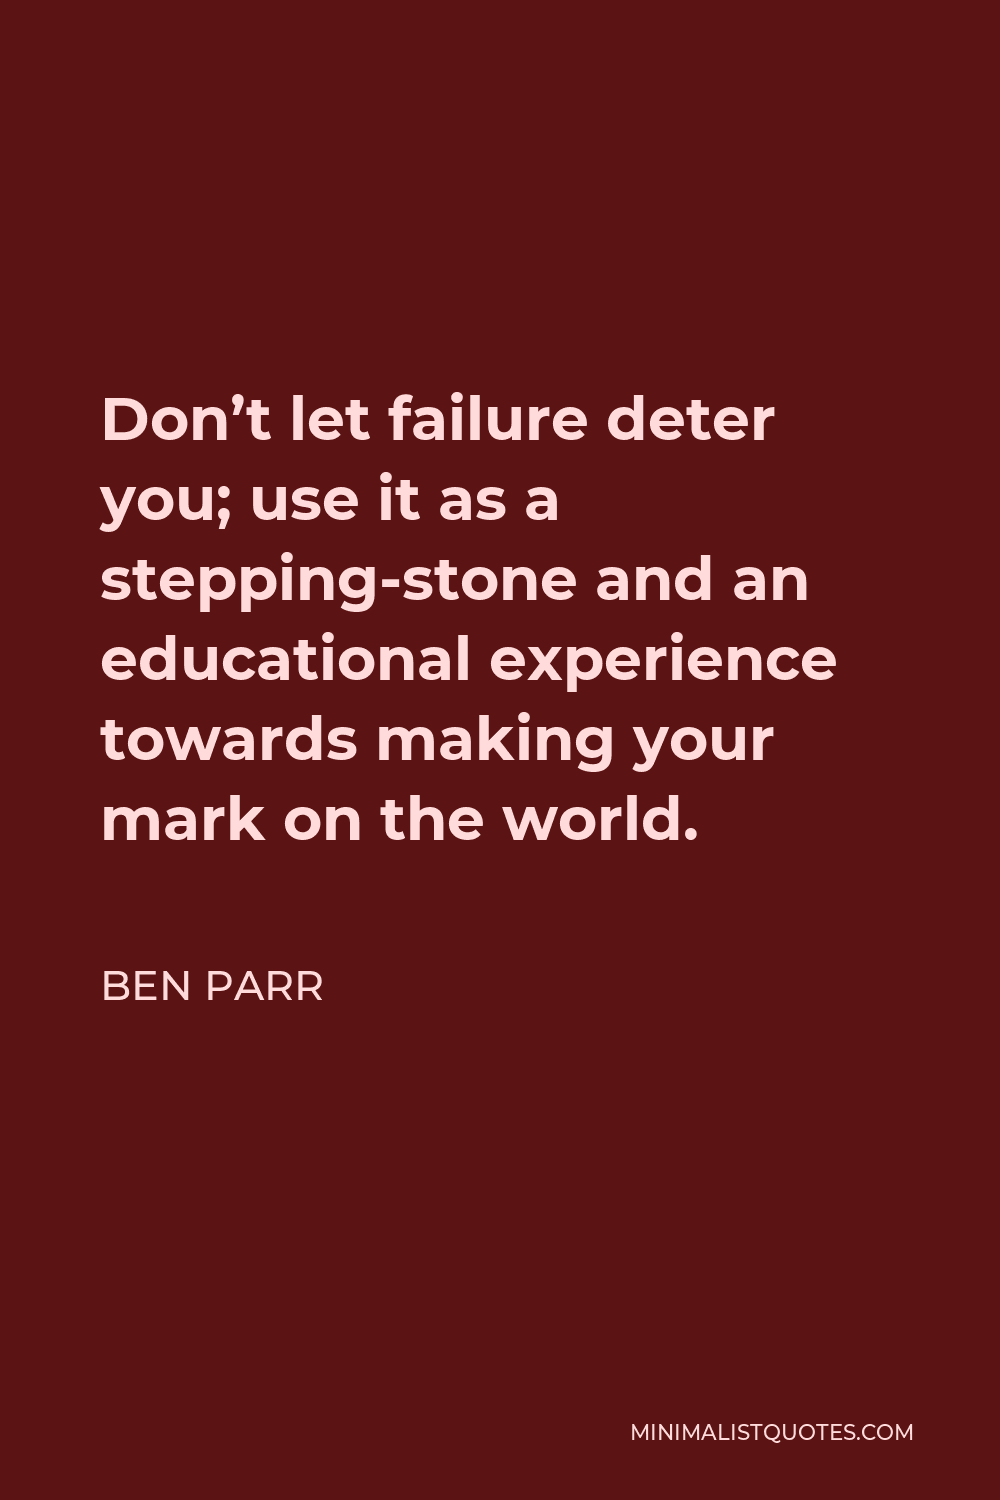 Ben Parr Quote - Don’t let failure deter you; use it as a stepping-stone and an educational experience towards making your mark on the world.